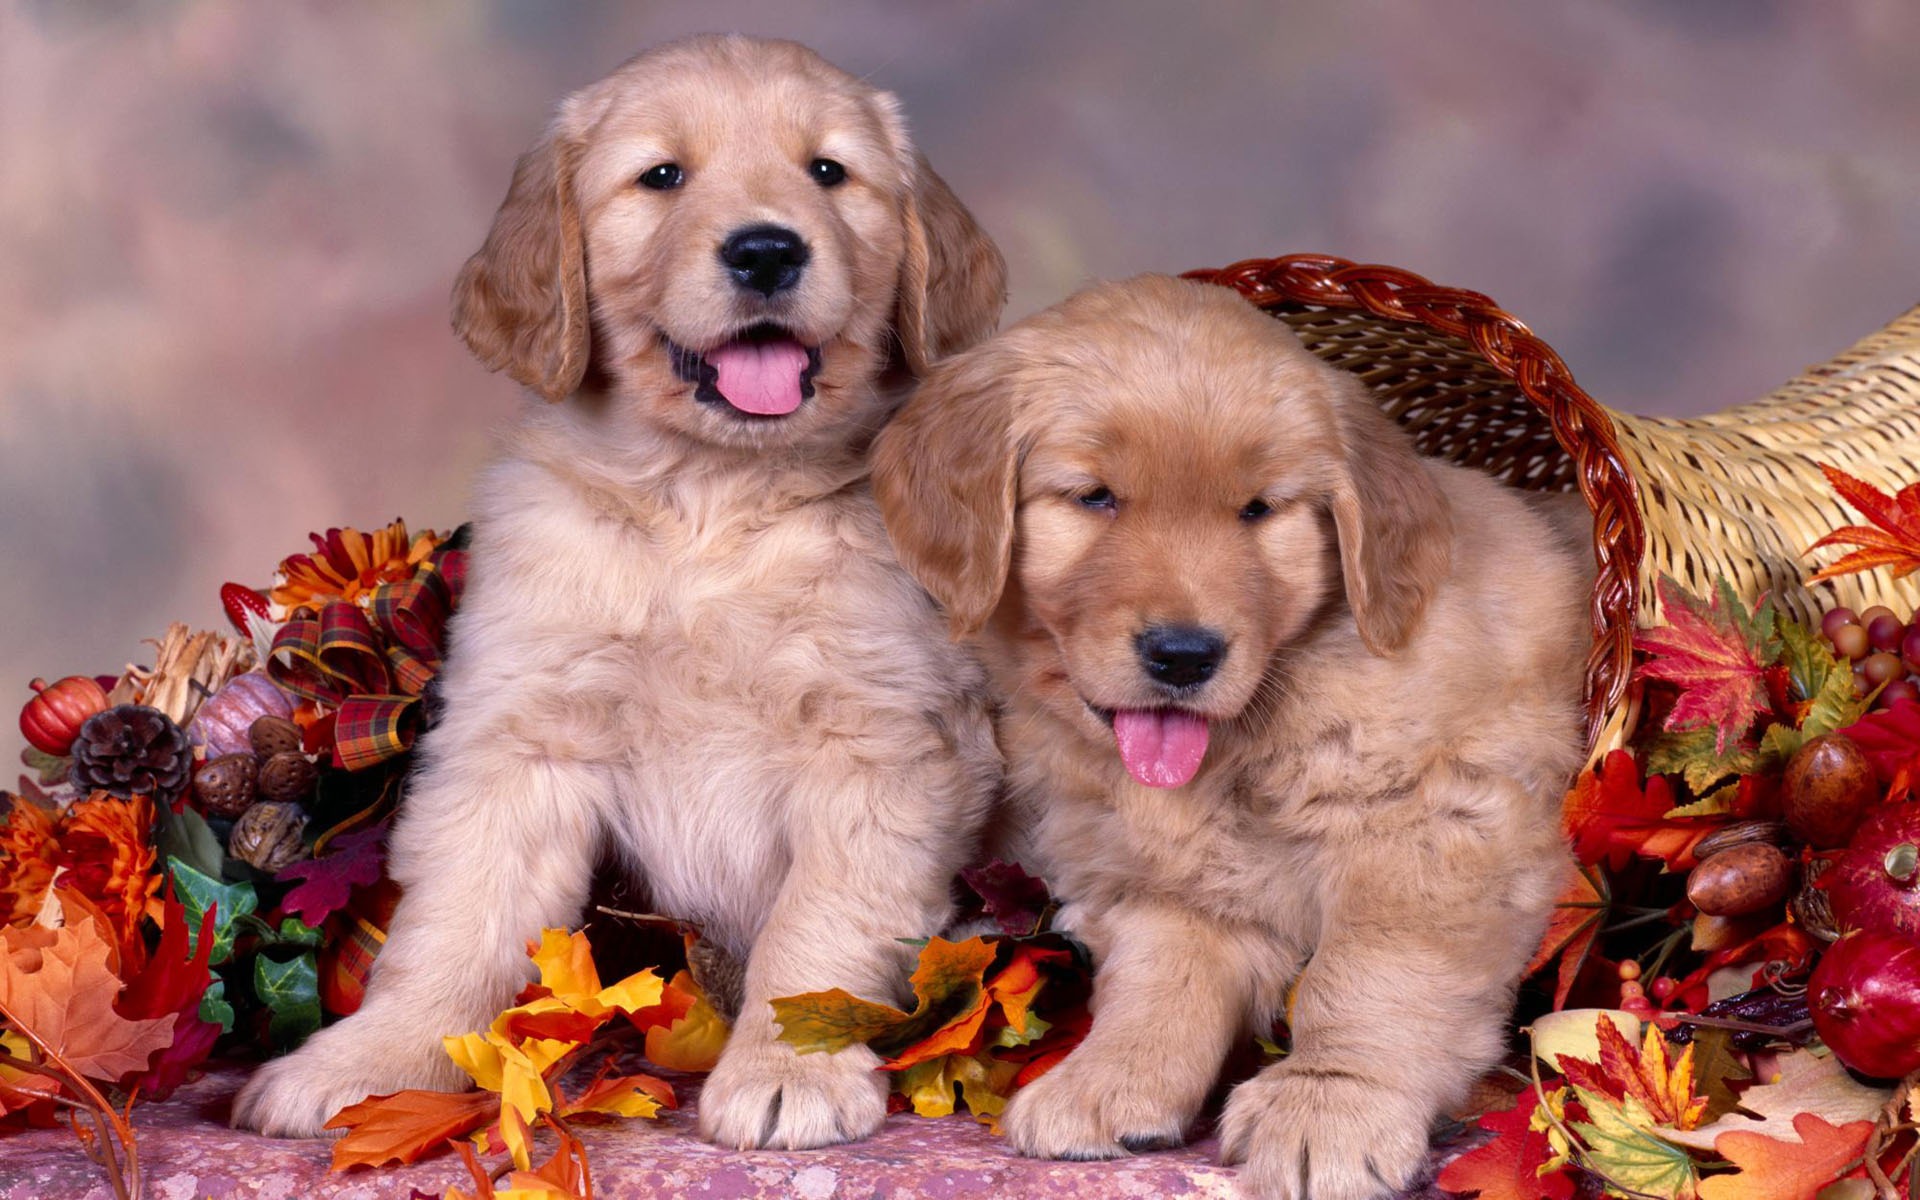 Puppy Photo HD wallpapers (2) #12 - 1920x1200